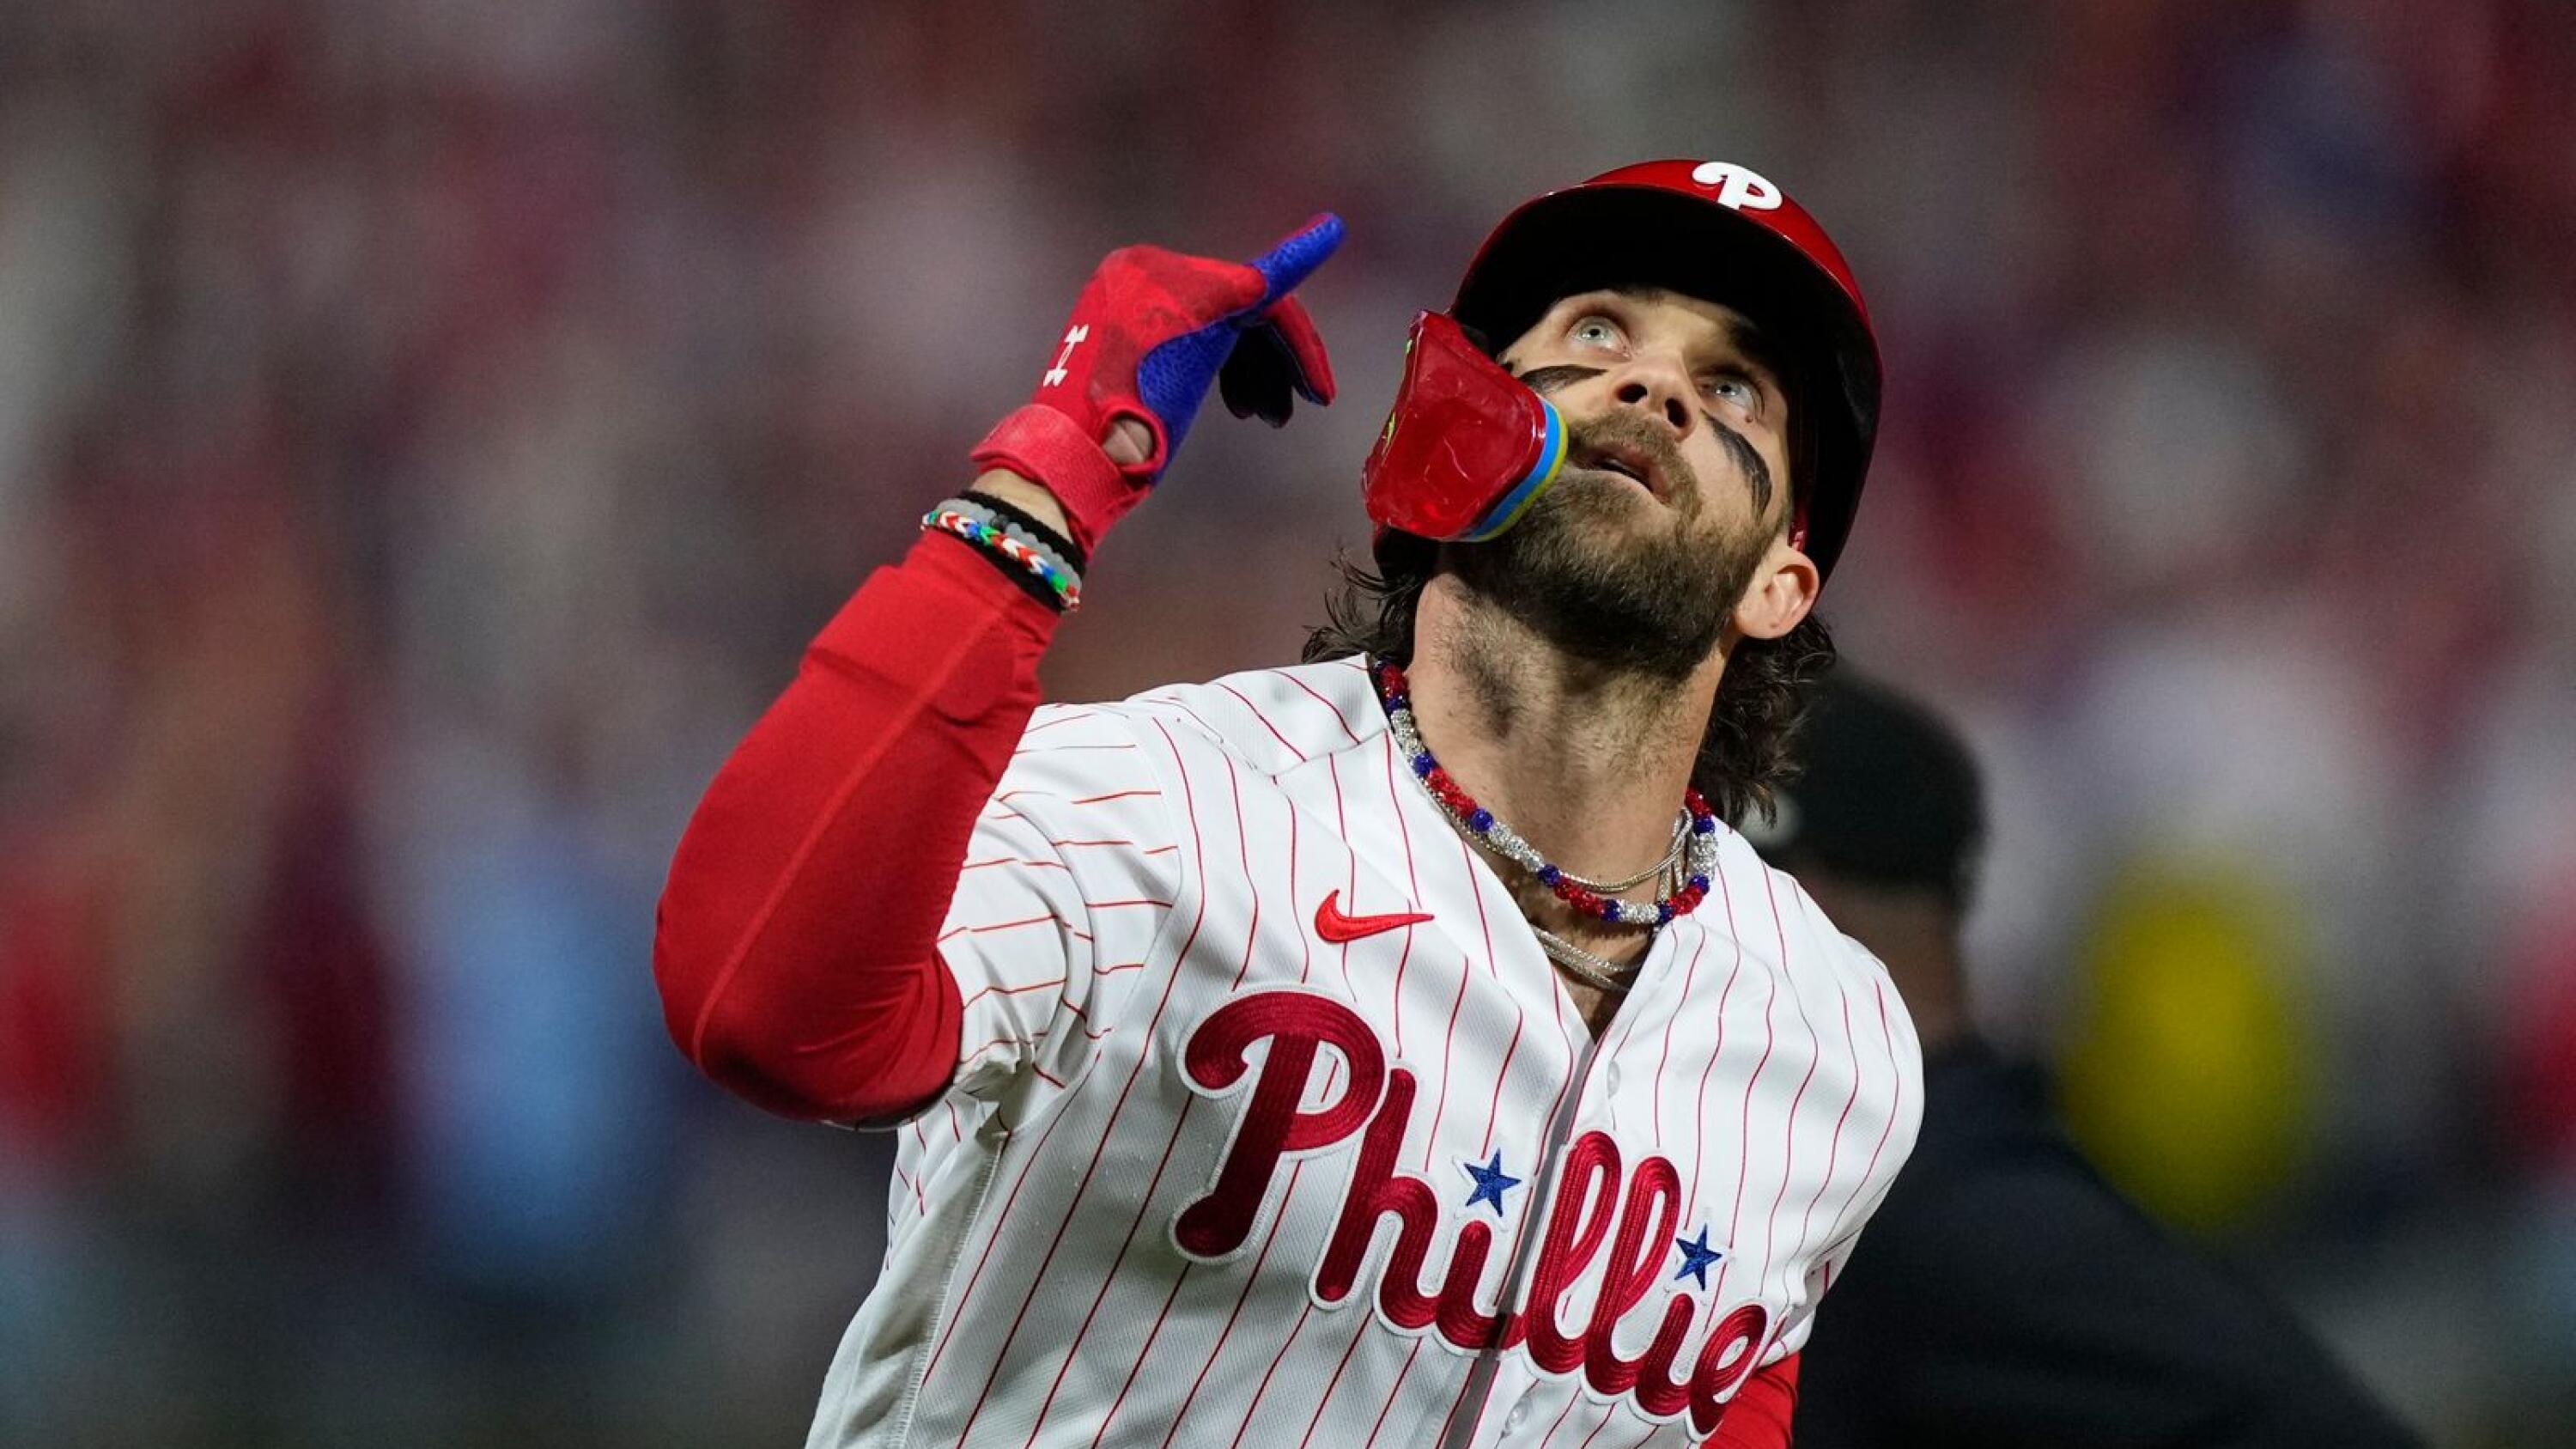 Bryce Harper Has The Most STANDARD Glove In The MLB 